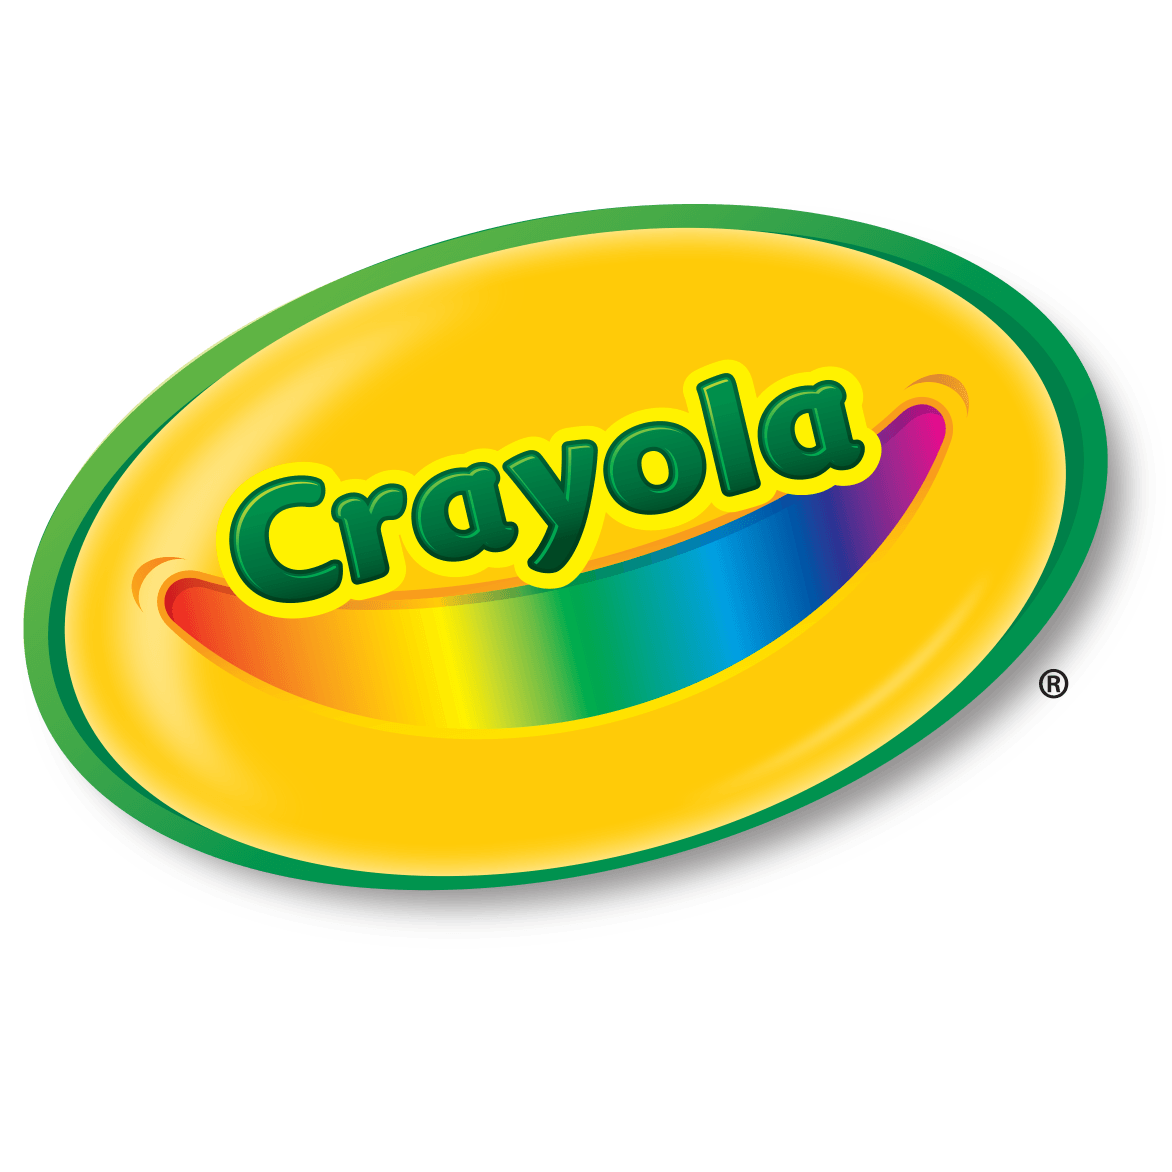 Common Yellow Logo - Crayola beloved Dandelion decided to announce his